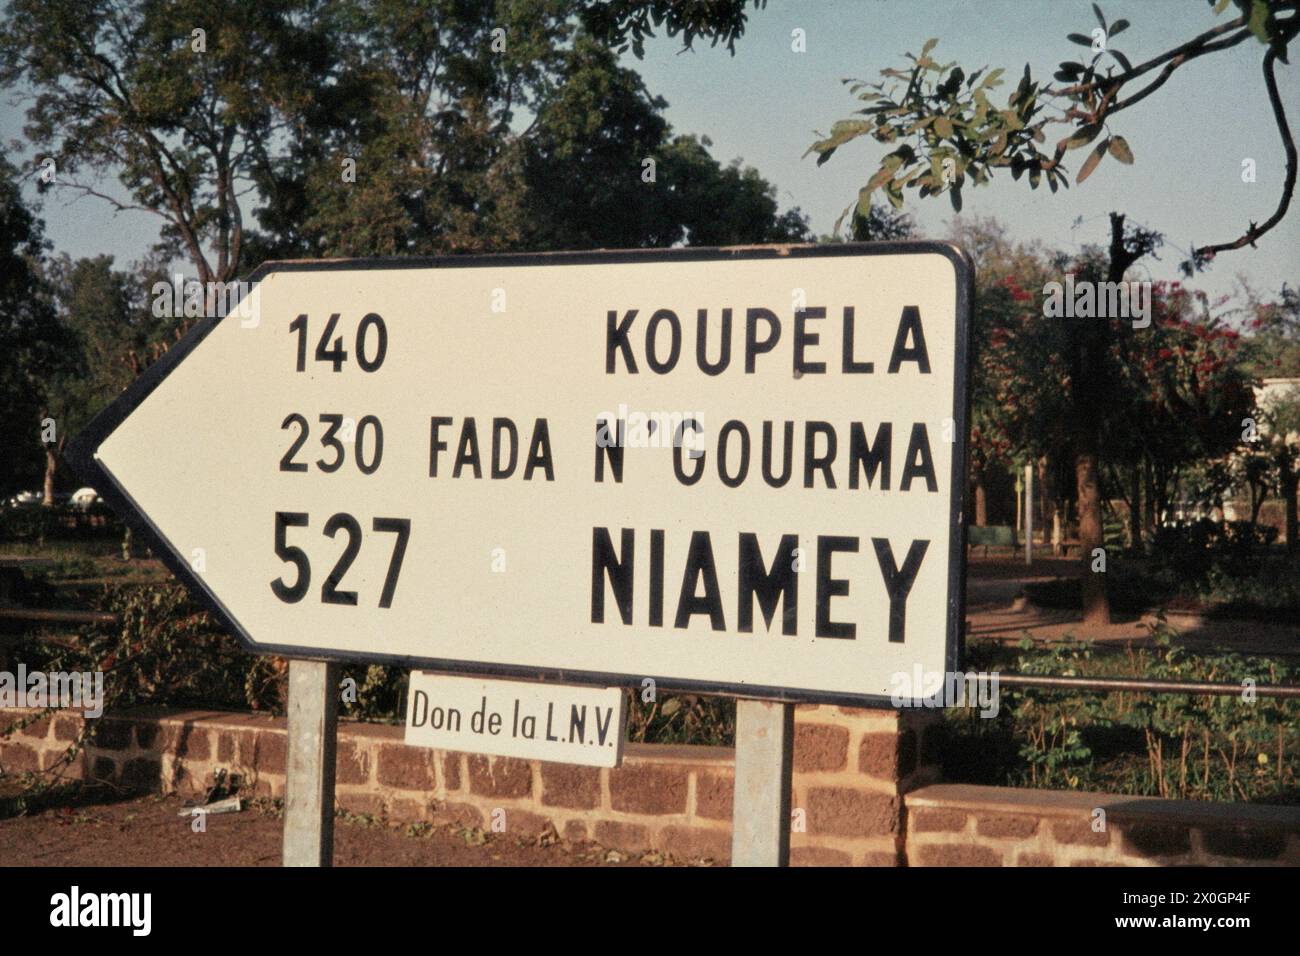 A street sign in Ouagadougou indicates the direction and distance to the towns of Koudela, Fada N'gourma and Niamey. [automated translation] Stock Photo